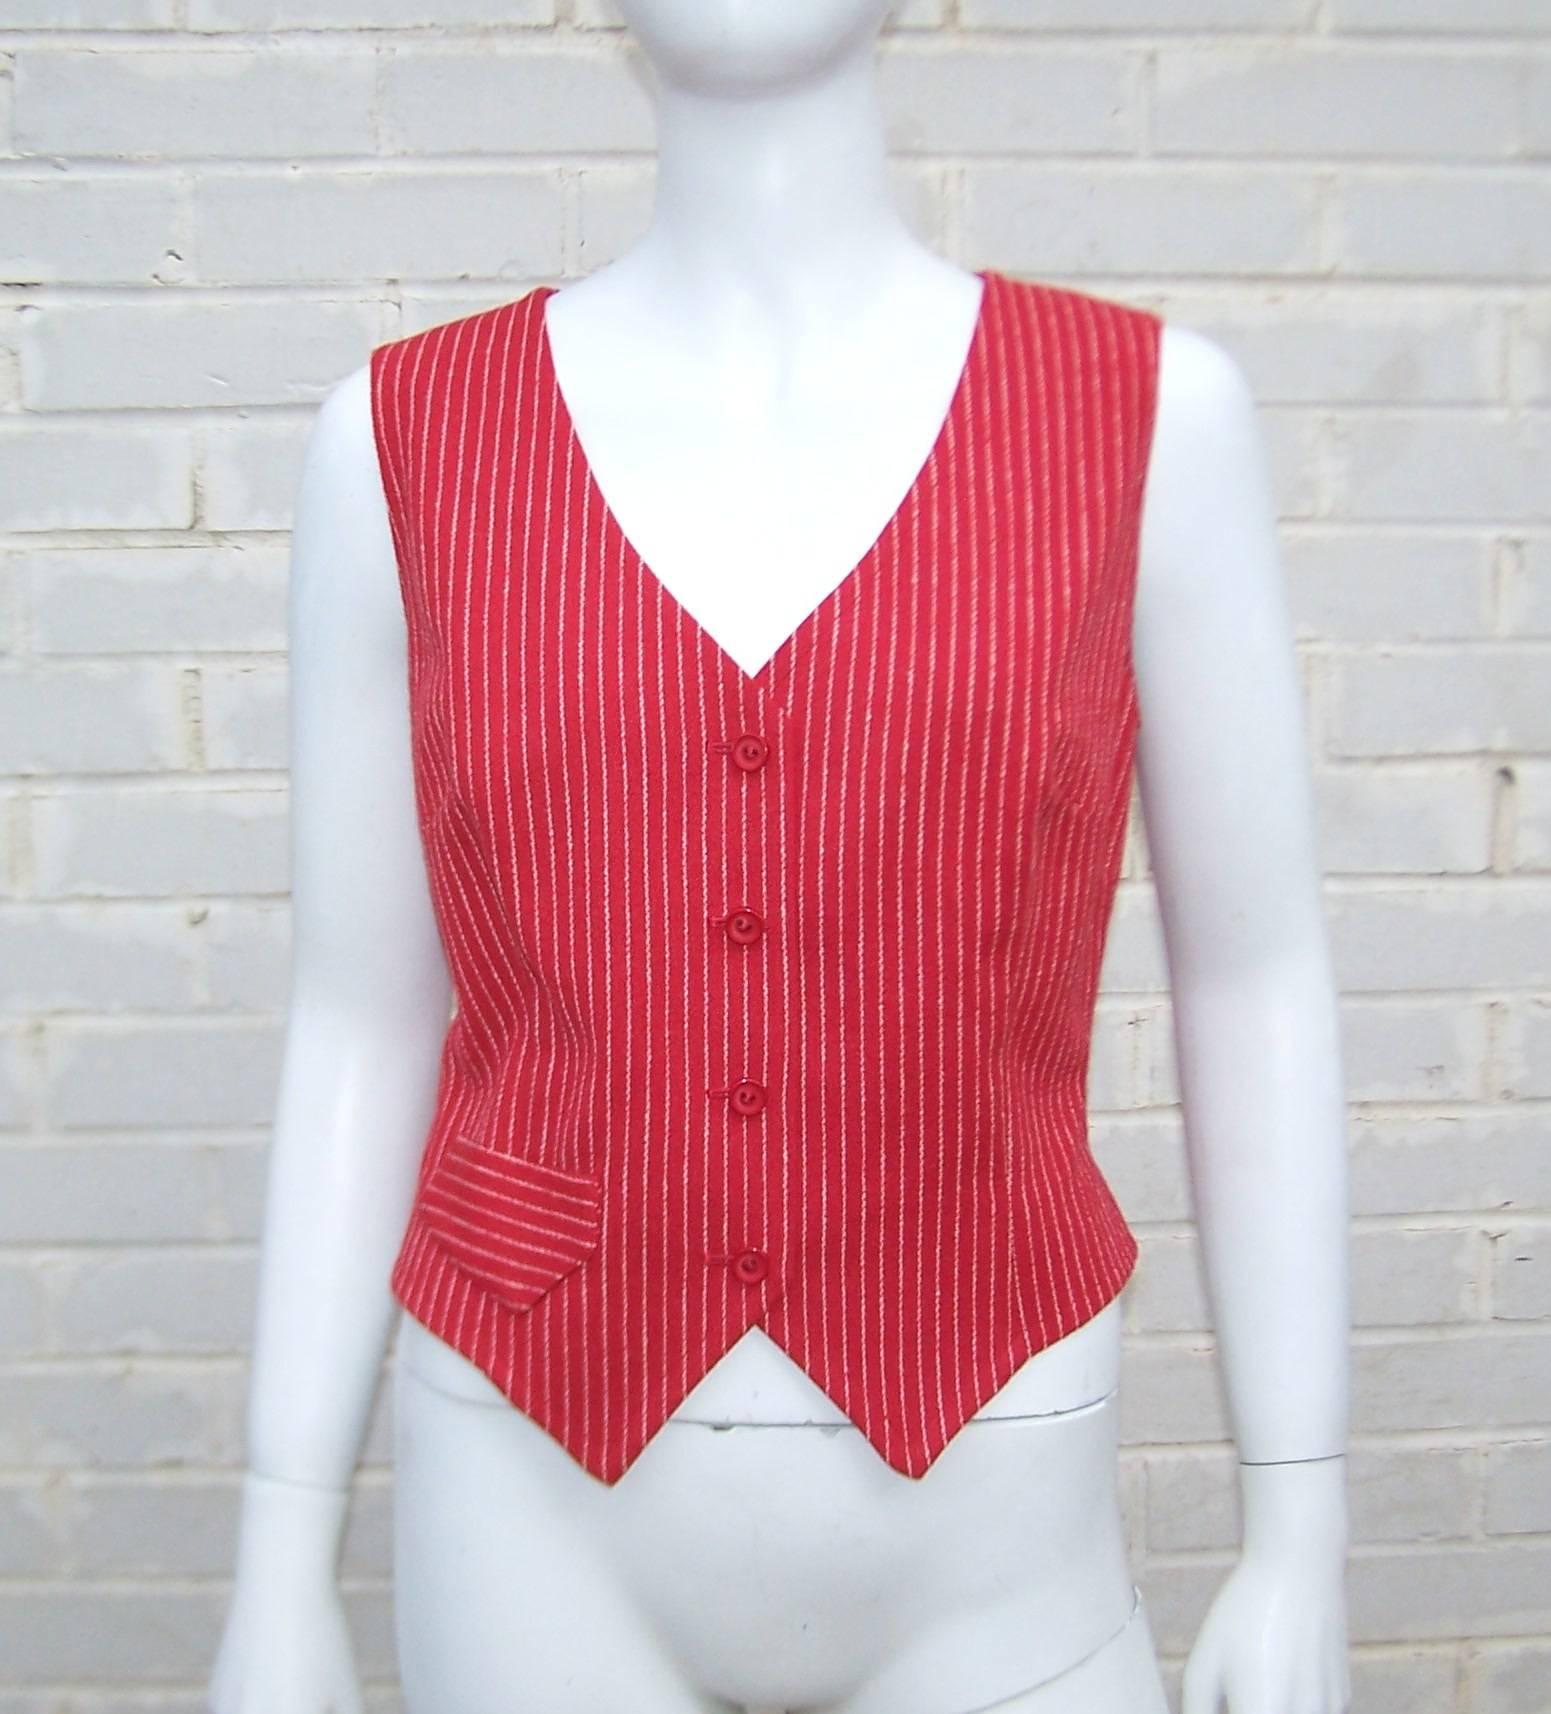 Get that old school 'Annie Hall' look with a classic waistcoat style vest from the classic American woolen company, Pendleton Mills.  This 100% wool design is updated with a lipstick red pinstripe perfect for a 1970's detail to a modern